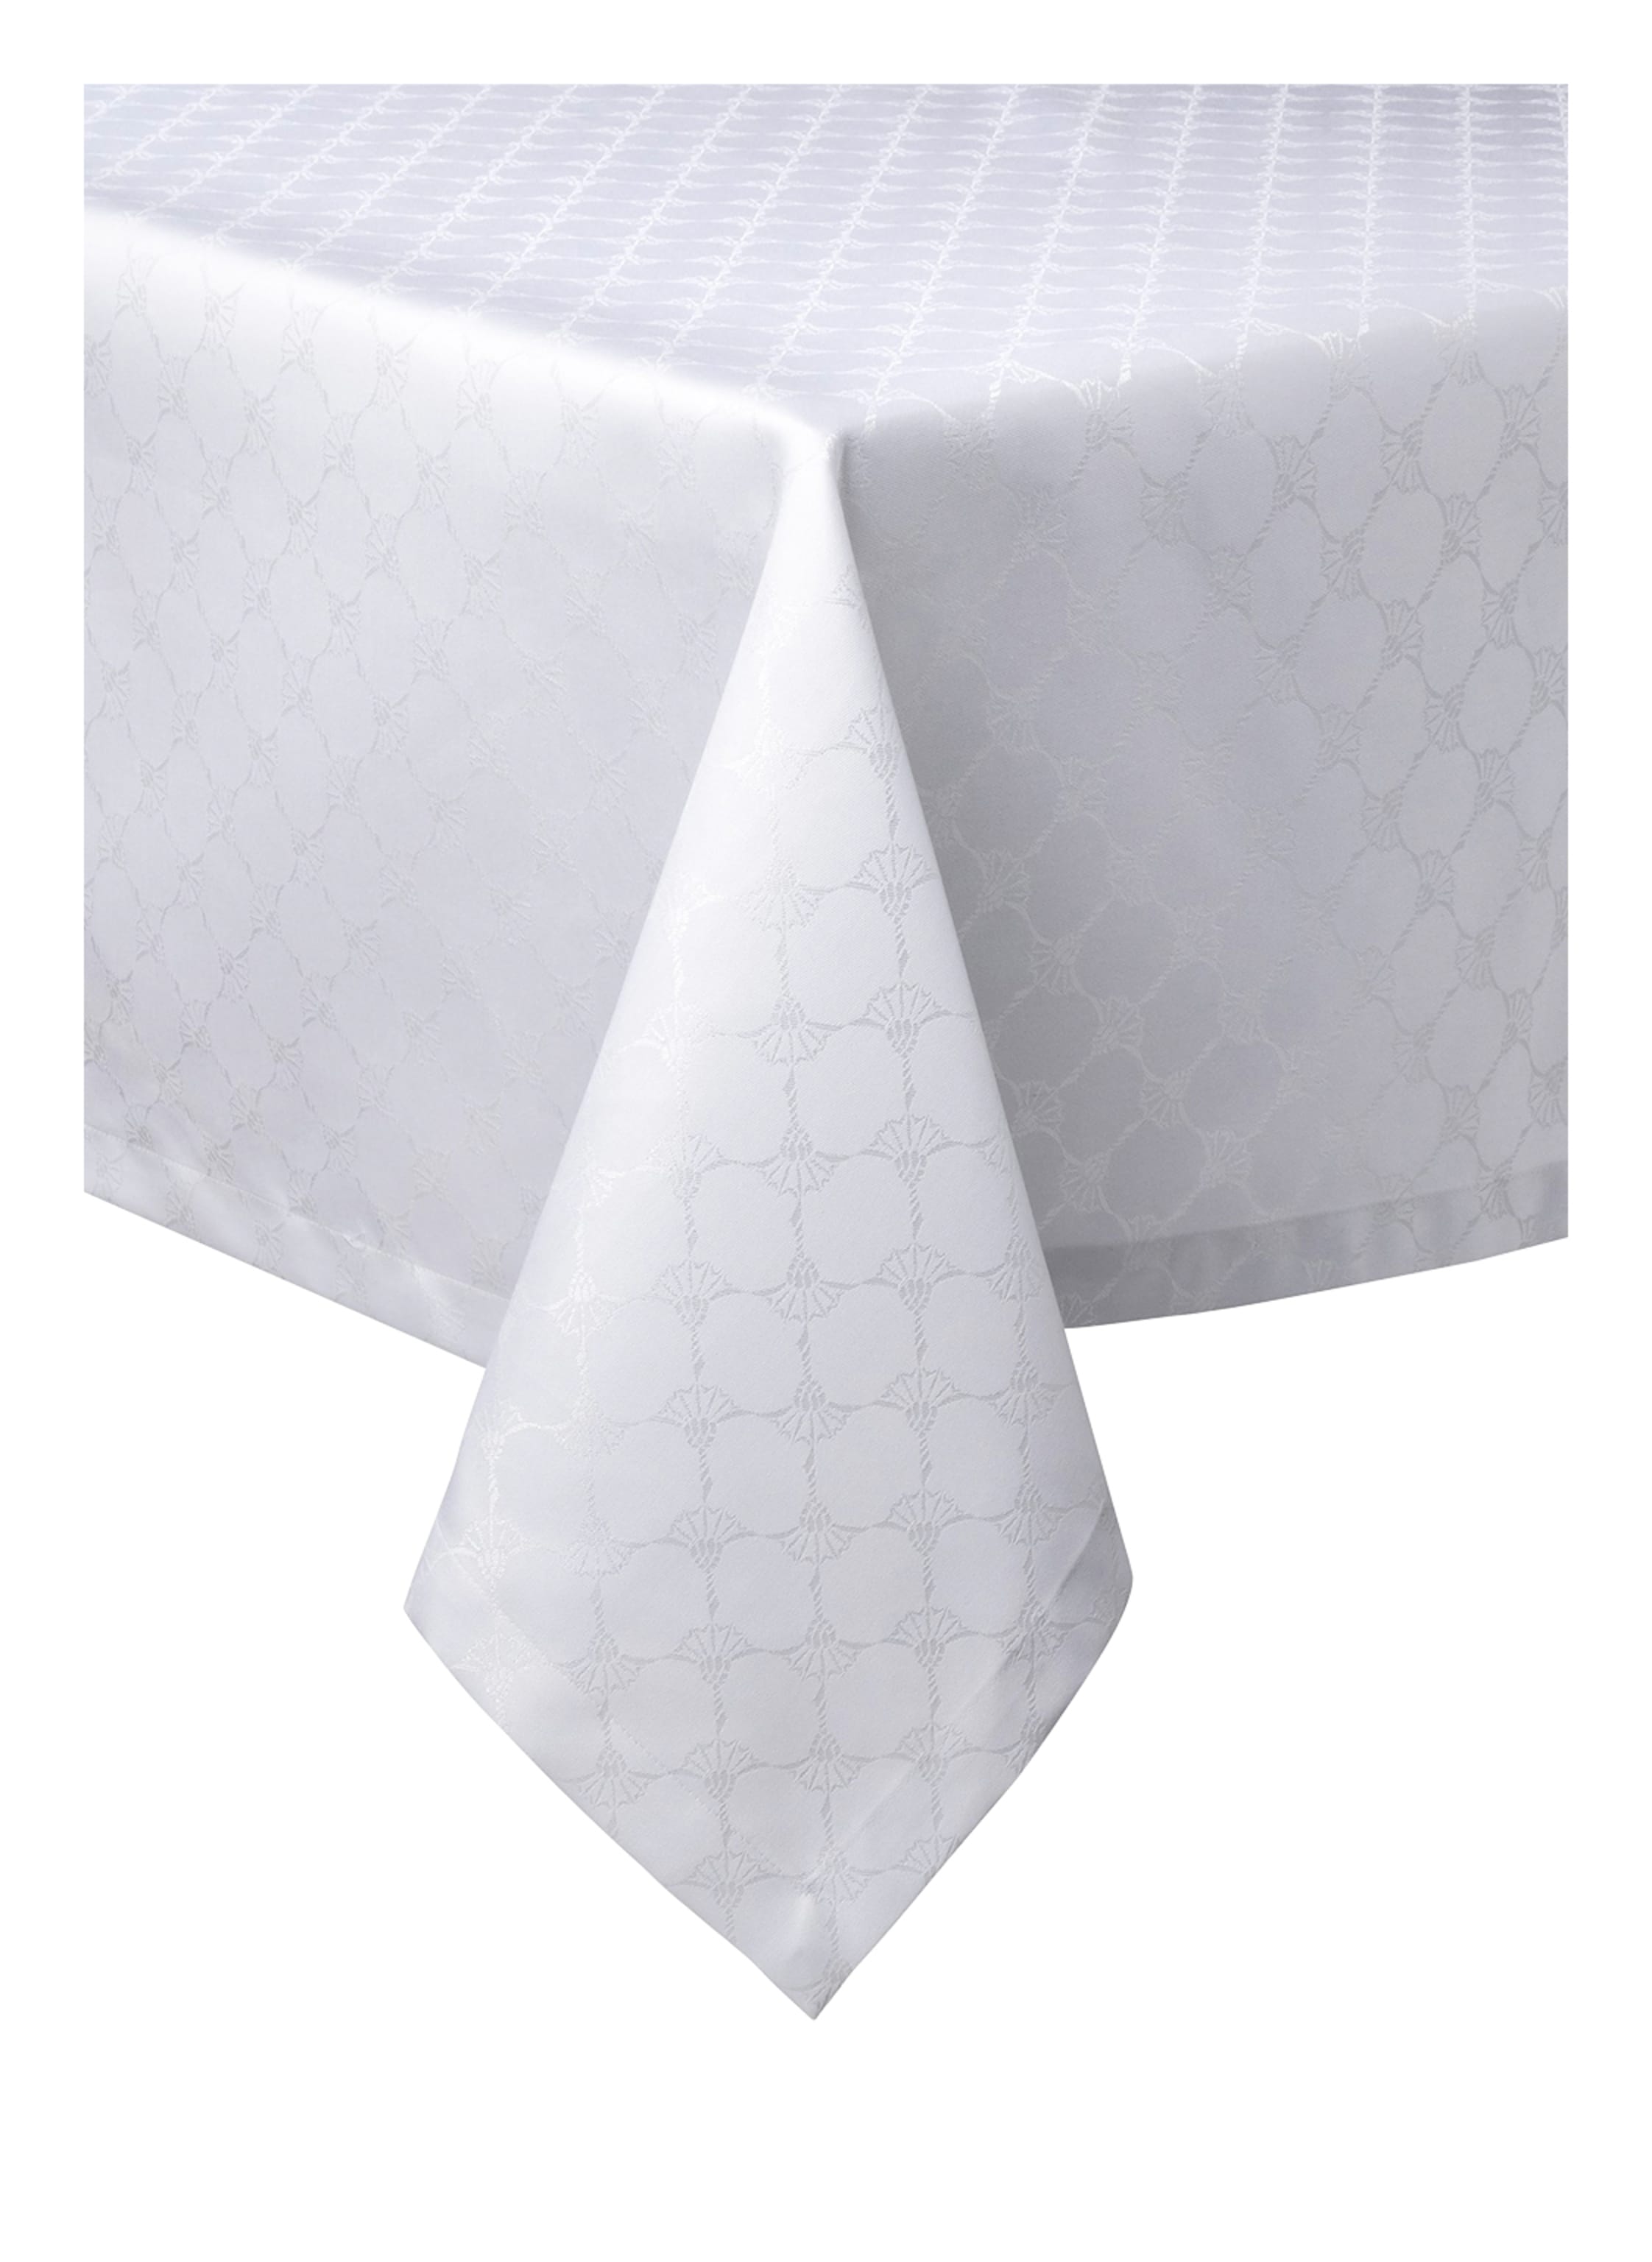 JOOP! Table cloth CORNFLOWER ALL-OVER in white